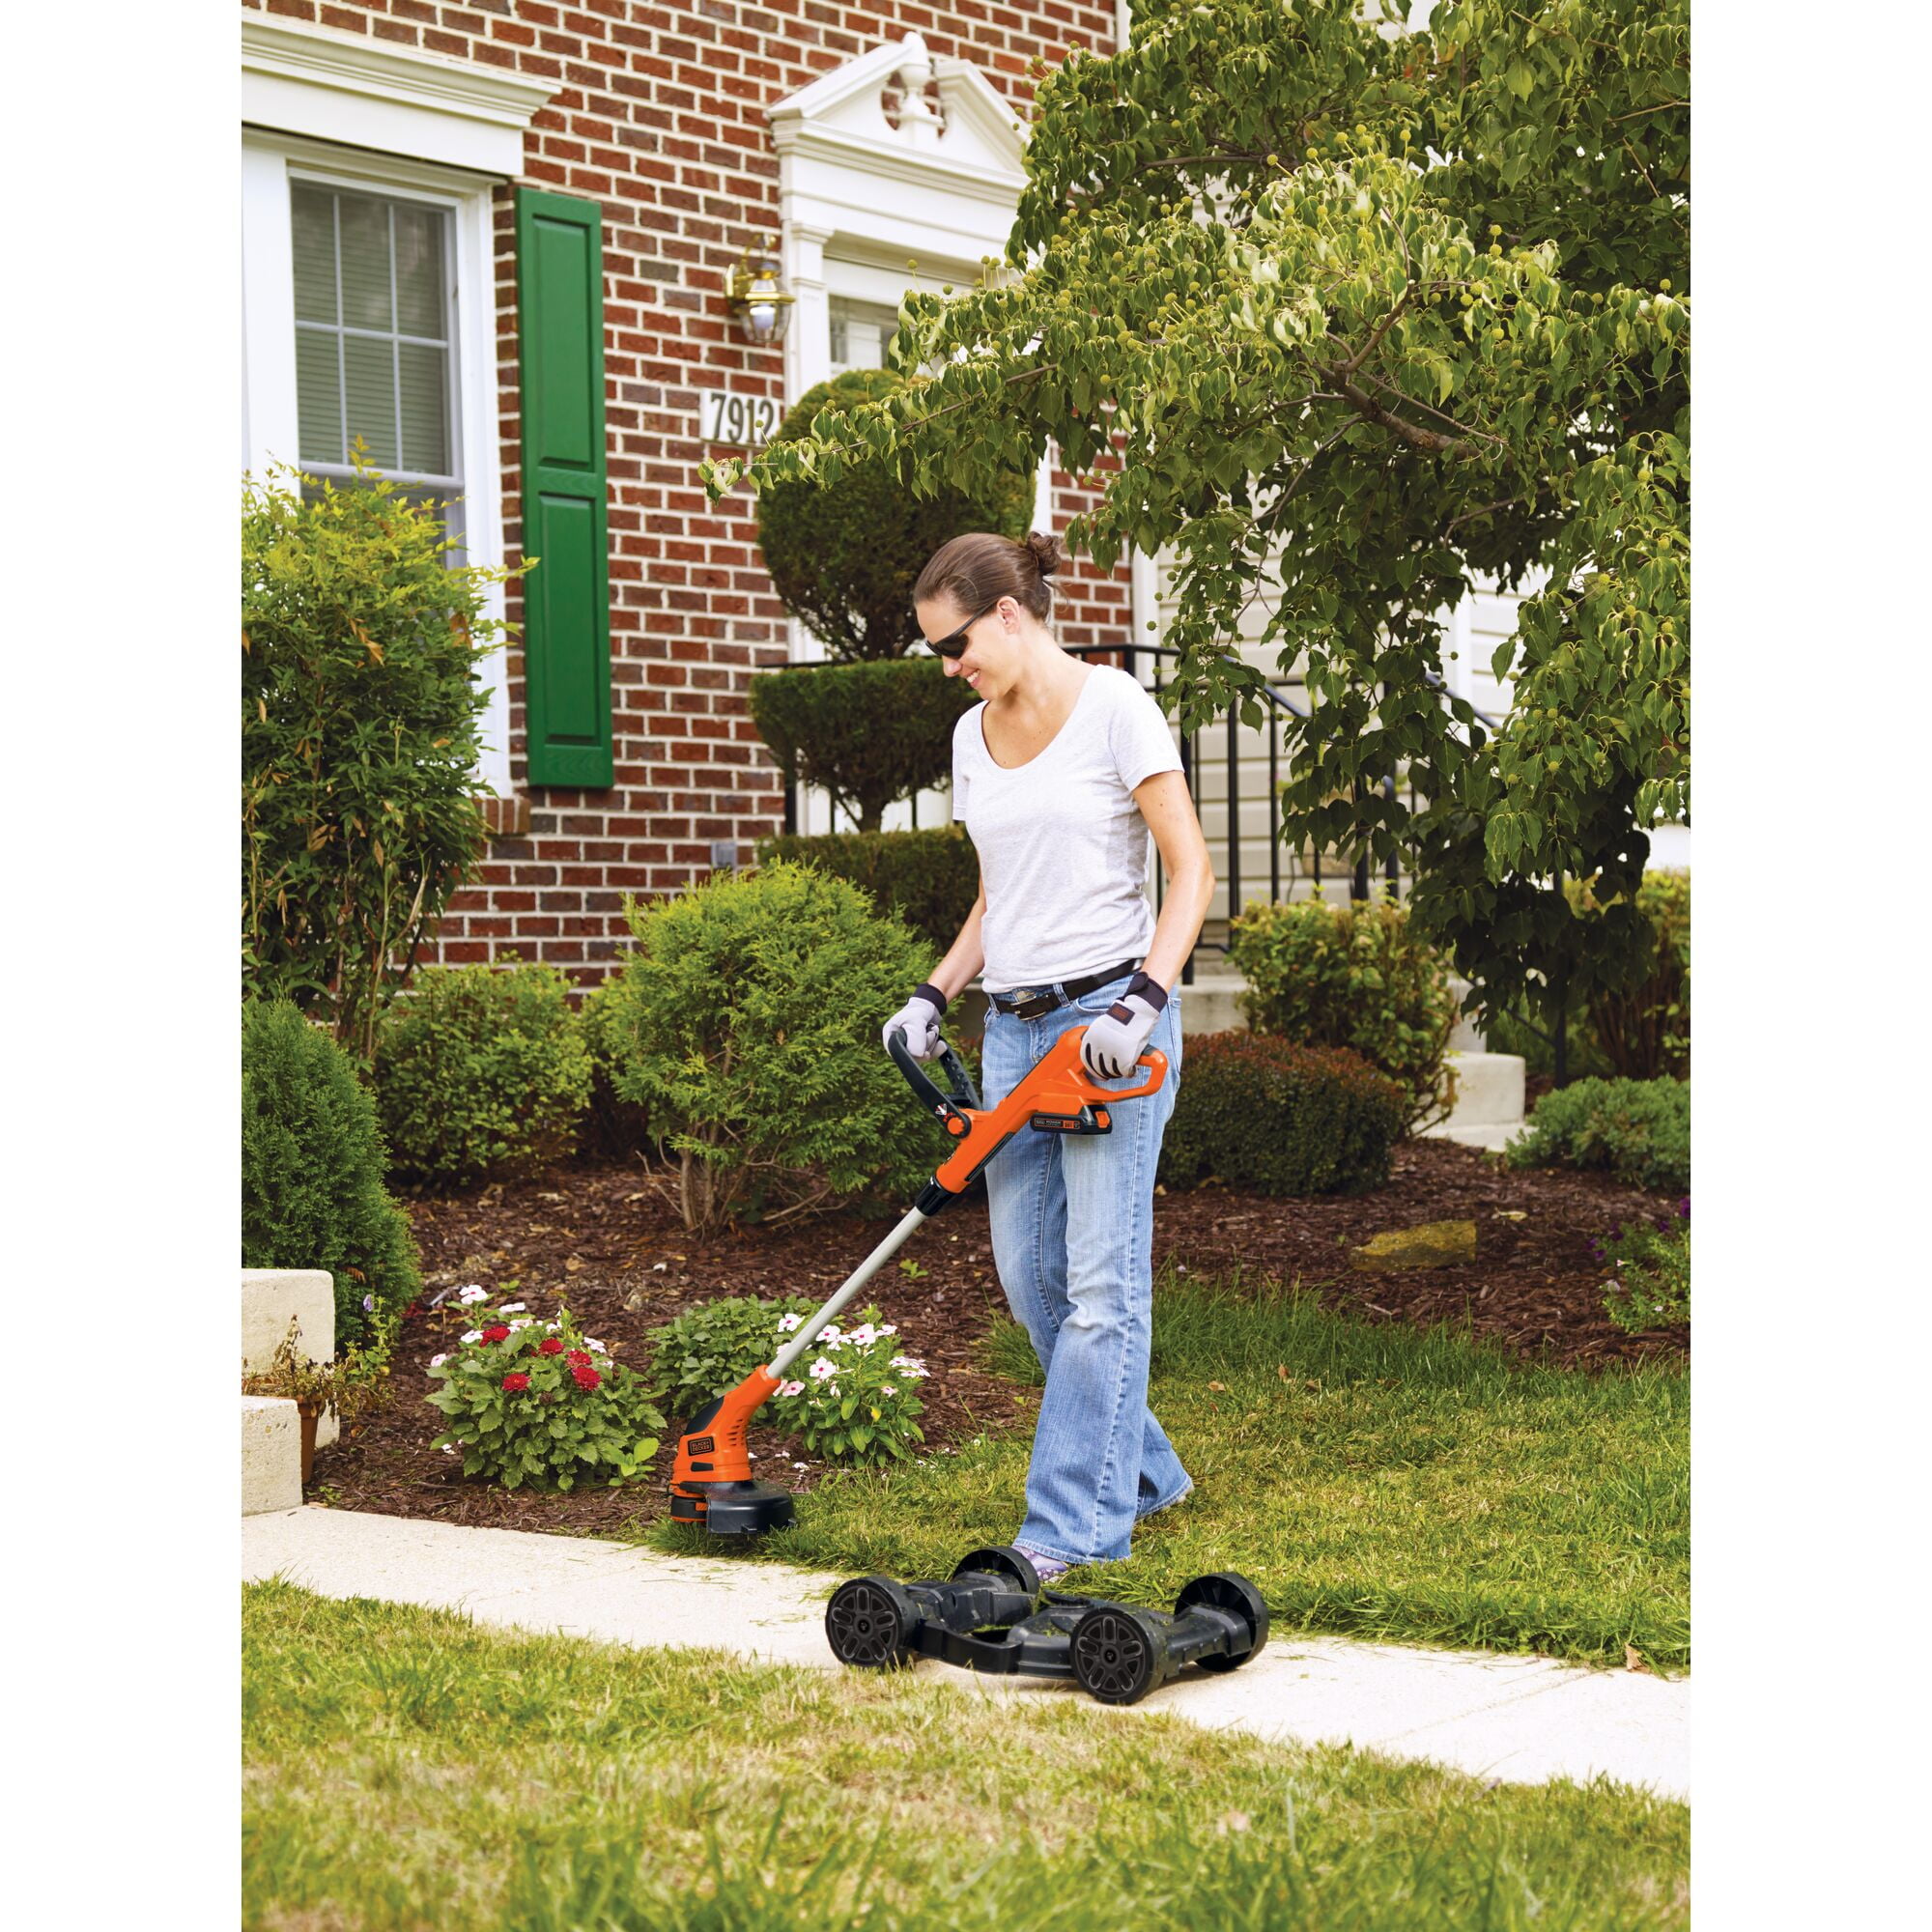 Black+decker LST3003ZP 12 in. 20V Max Lithium-Ion Cordless 2-in-1 String Grass Trimmer/Lawn Edger with Bonus 3-Pack of Spools Included